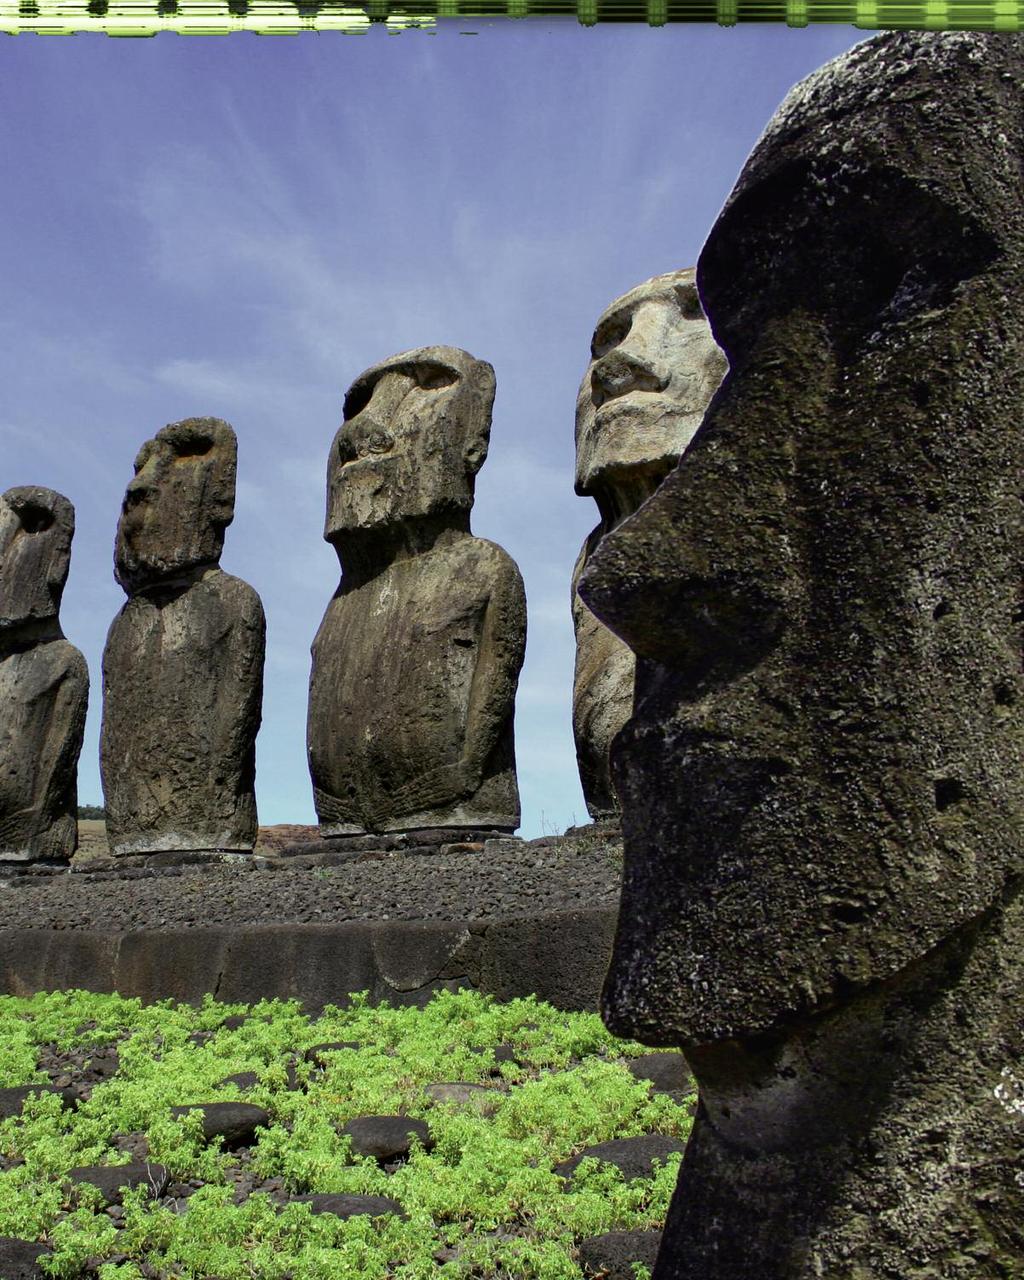 ...Hundreds of gigantic stone figures stood in rows along the cliffs. How Strange.